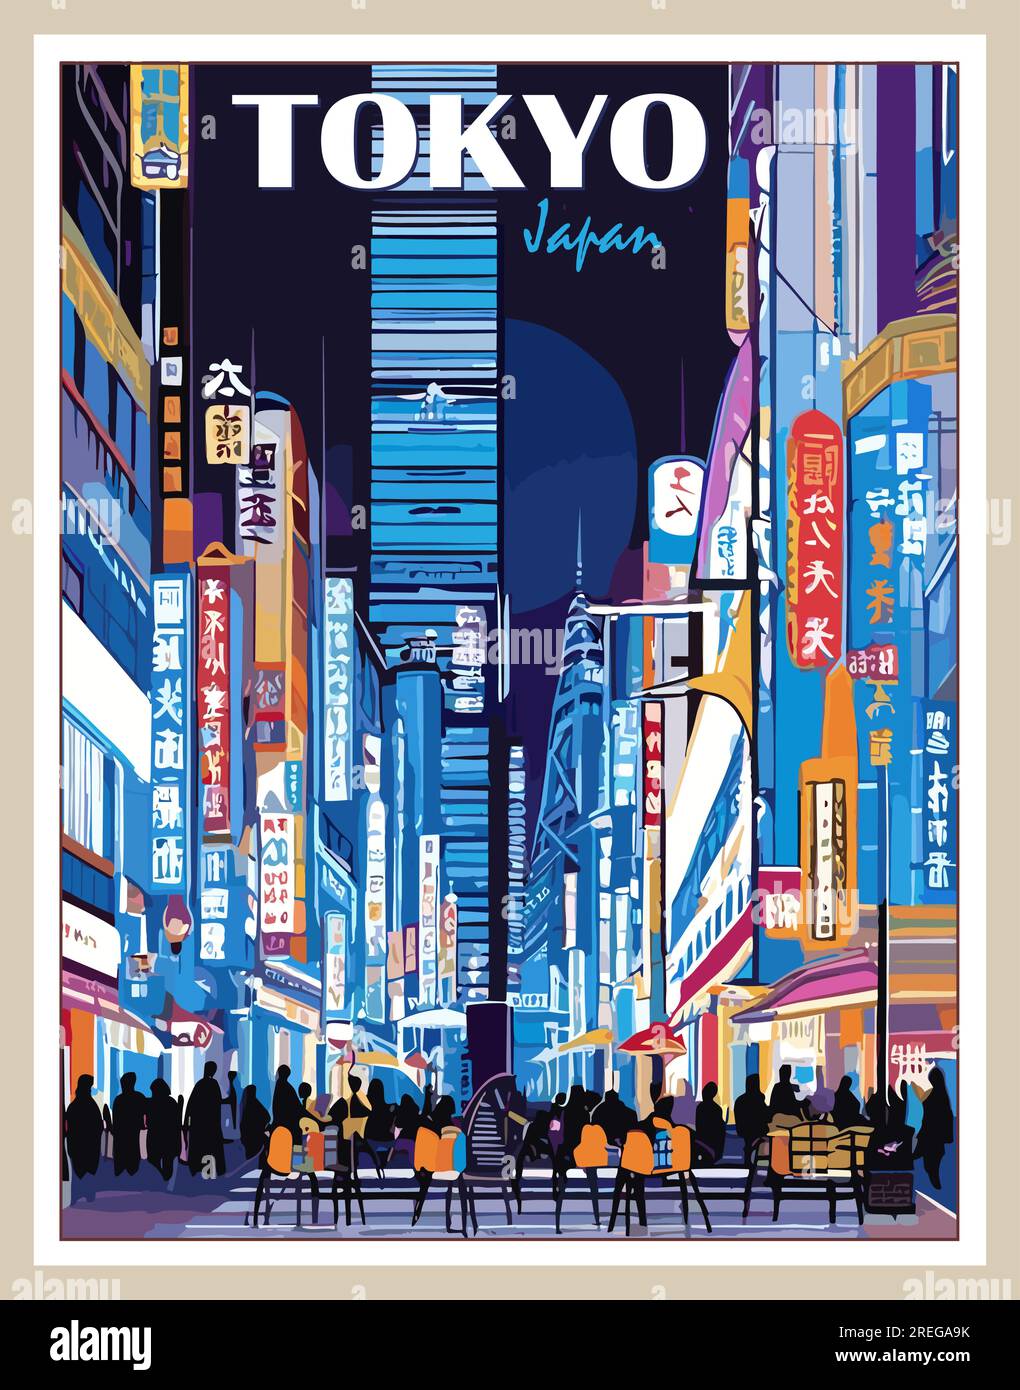 Tokyo Japan Travel Destination Poster. Exotic travelling, summer vacation, holidays concept. Night city, megapolis vector colorful illustration Stock Vector